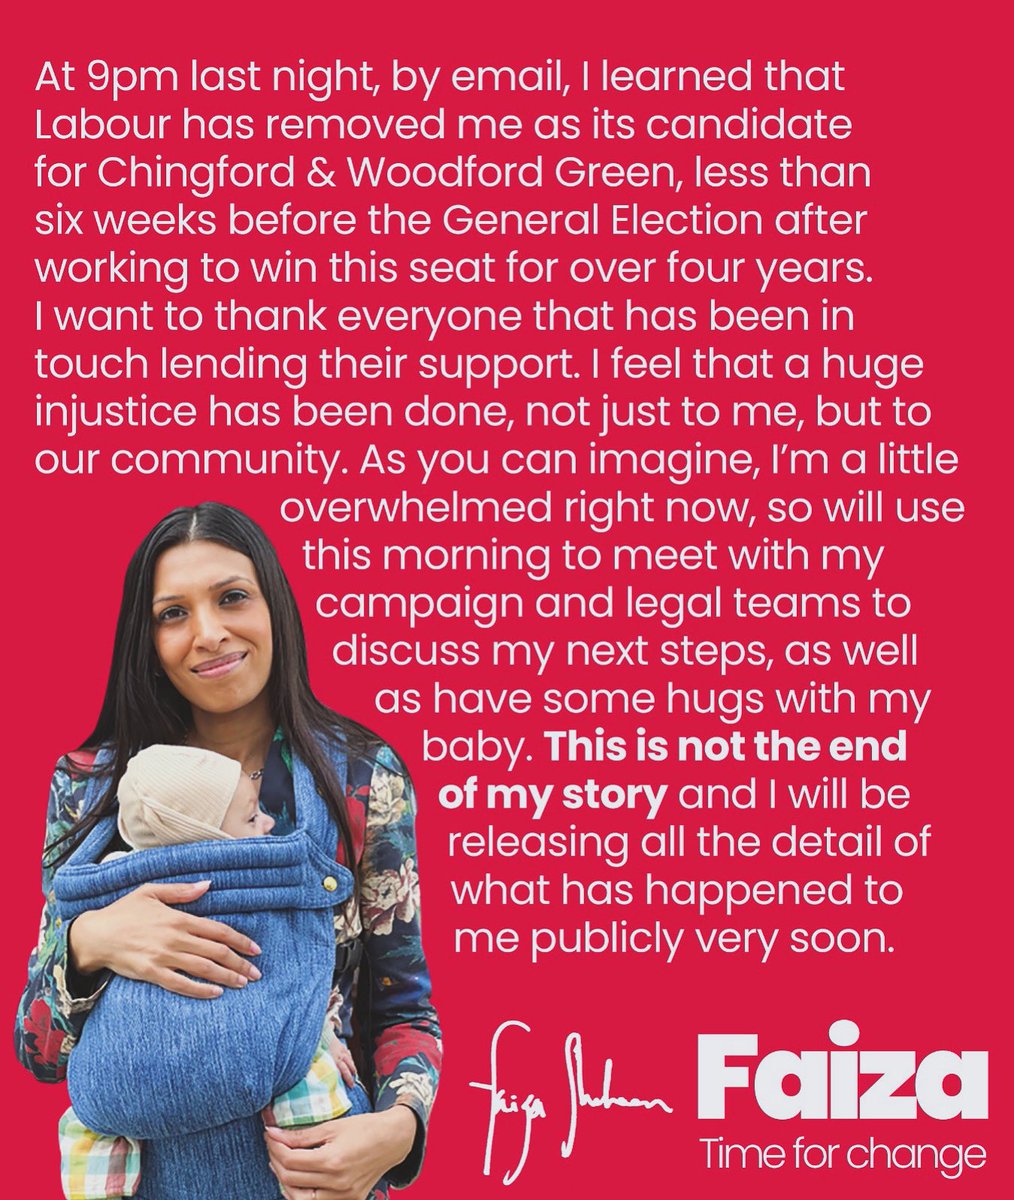 I’m in such shock, but I’m a fighter. Sign up to my mailing list below. I’ll put out more later today. It’s hard for me to put me into words how much your support means to me, from my heart, thank you faizashaheen.co.uk/join-the-campa…